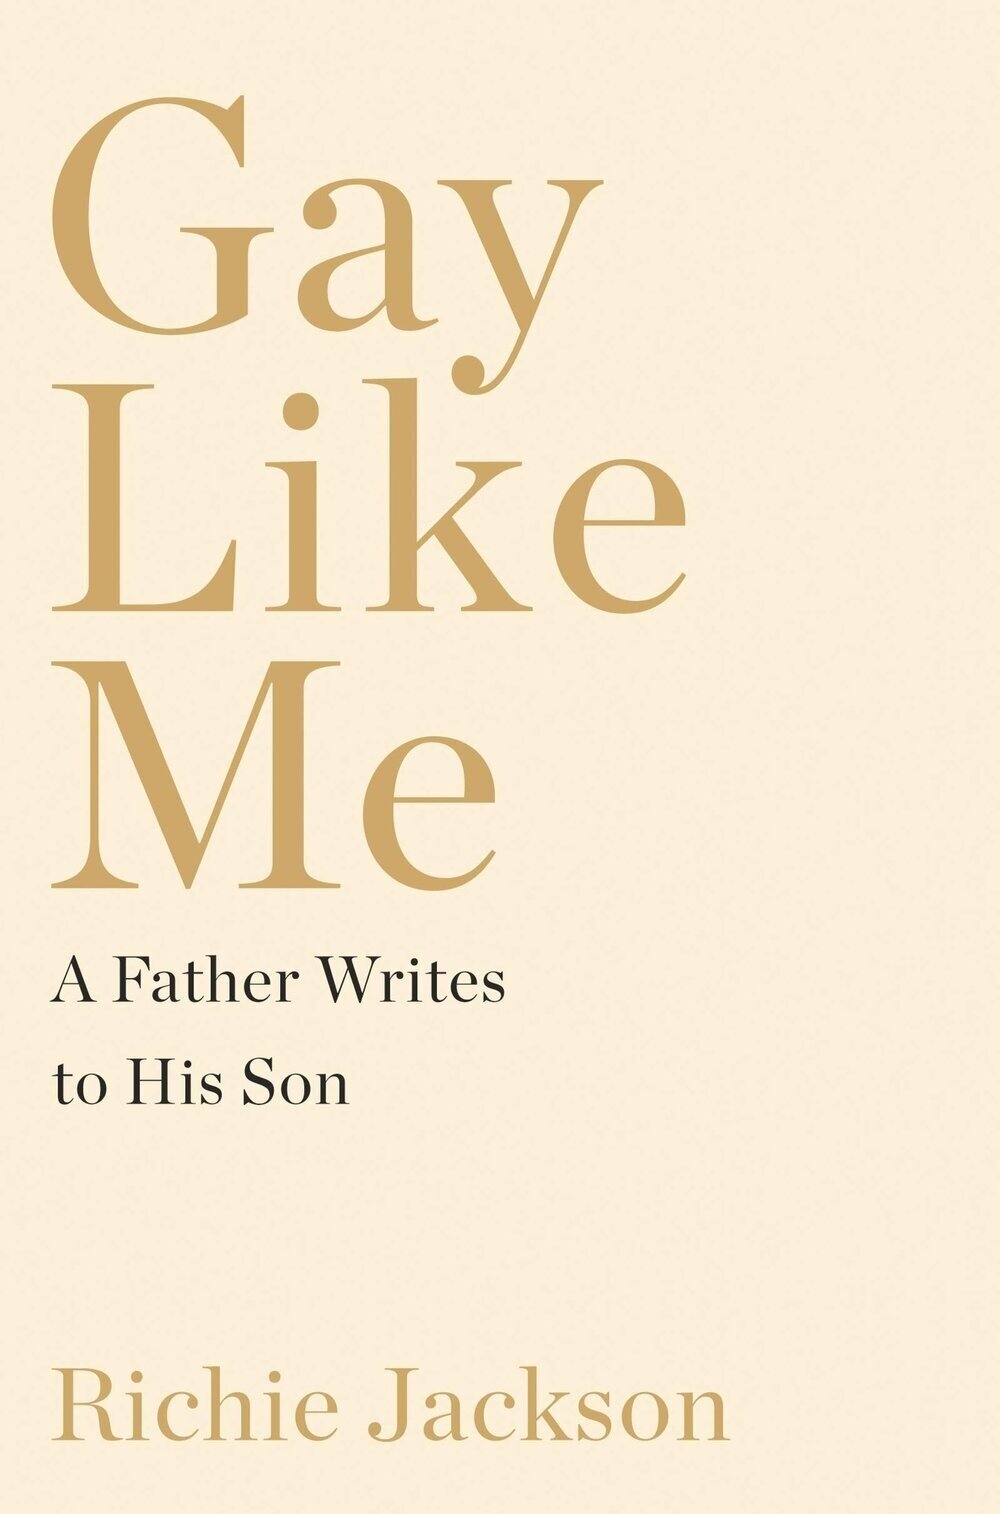 Best+Nonfiction+2020+Gay+Like+Me+A+Father+Writes+to+His+Son+by+Richie+Jackson.jpg